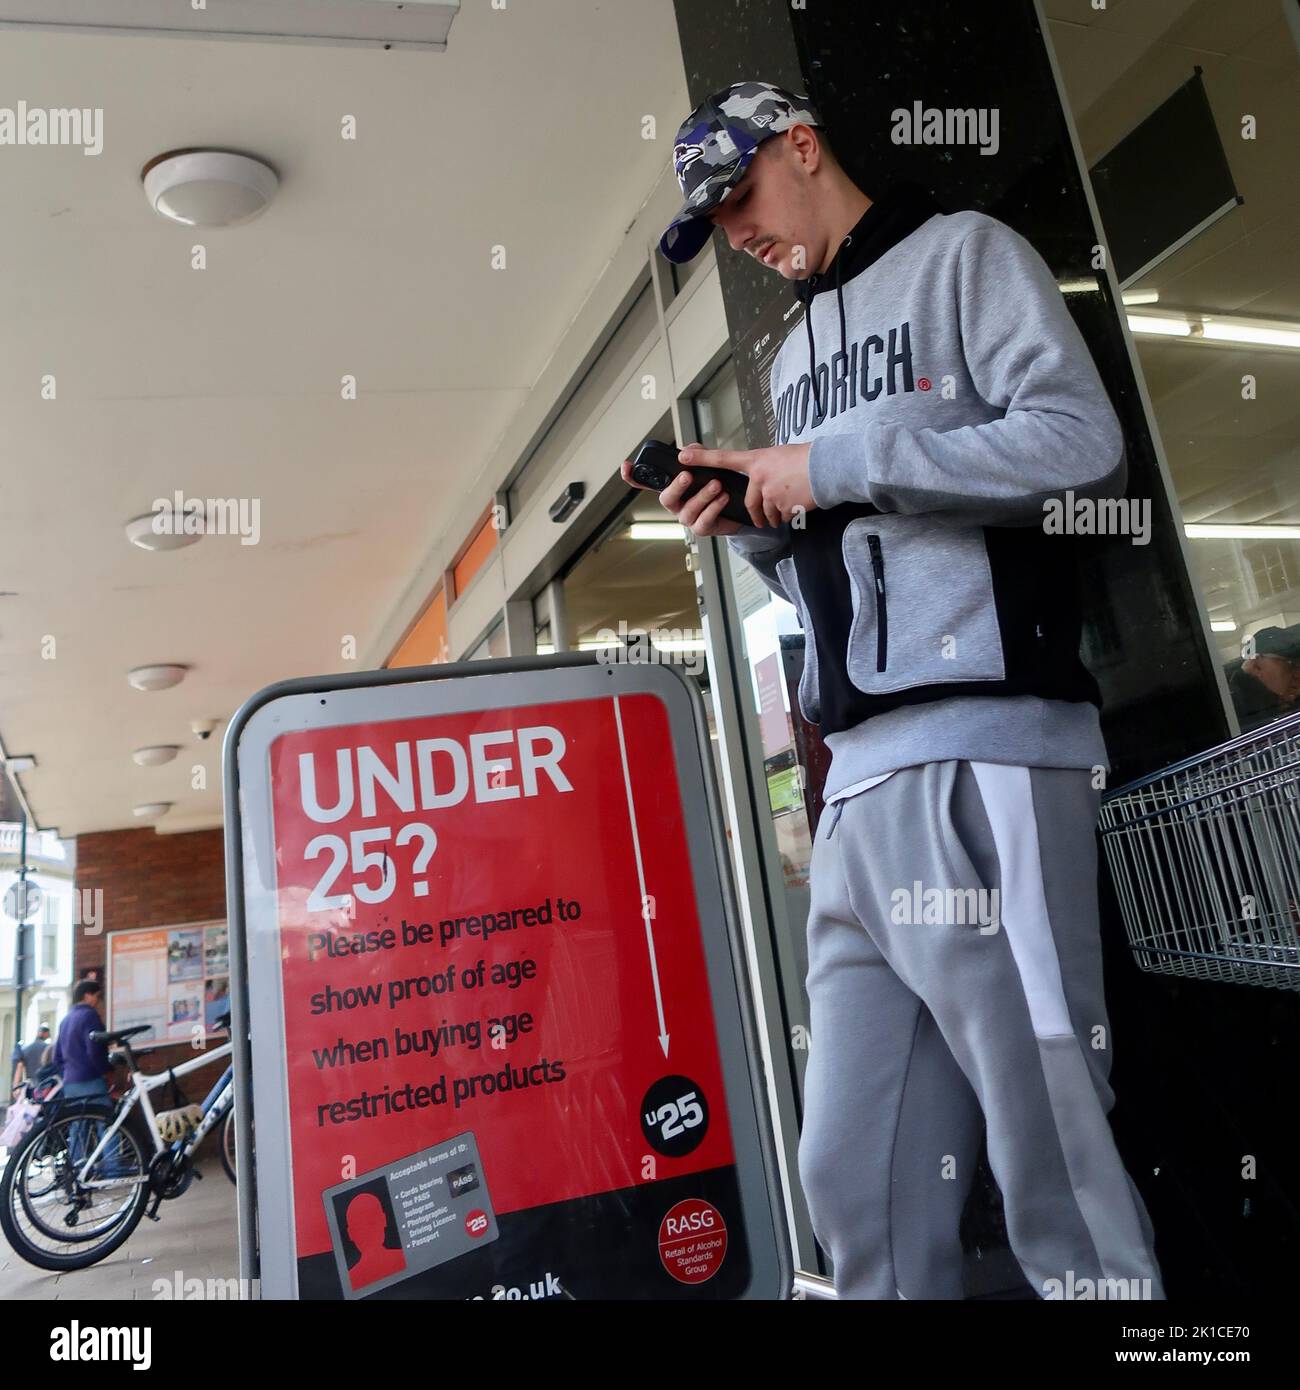 Ipswich, Suffolk, UK - 17 September 2022 : Young man coming out of Sainsbury’s by a sign advising if you are under 25 ID will be required before buying age restricted goods. Stock Photo